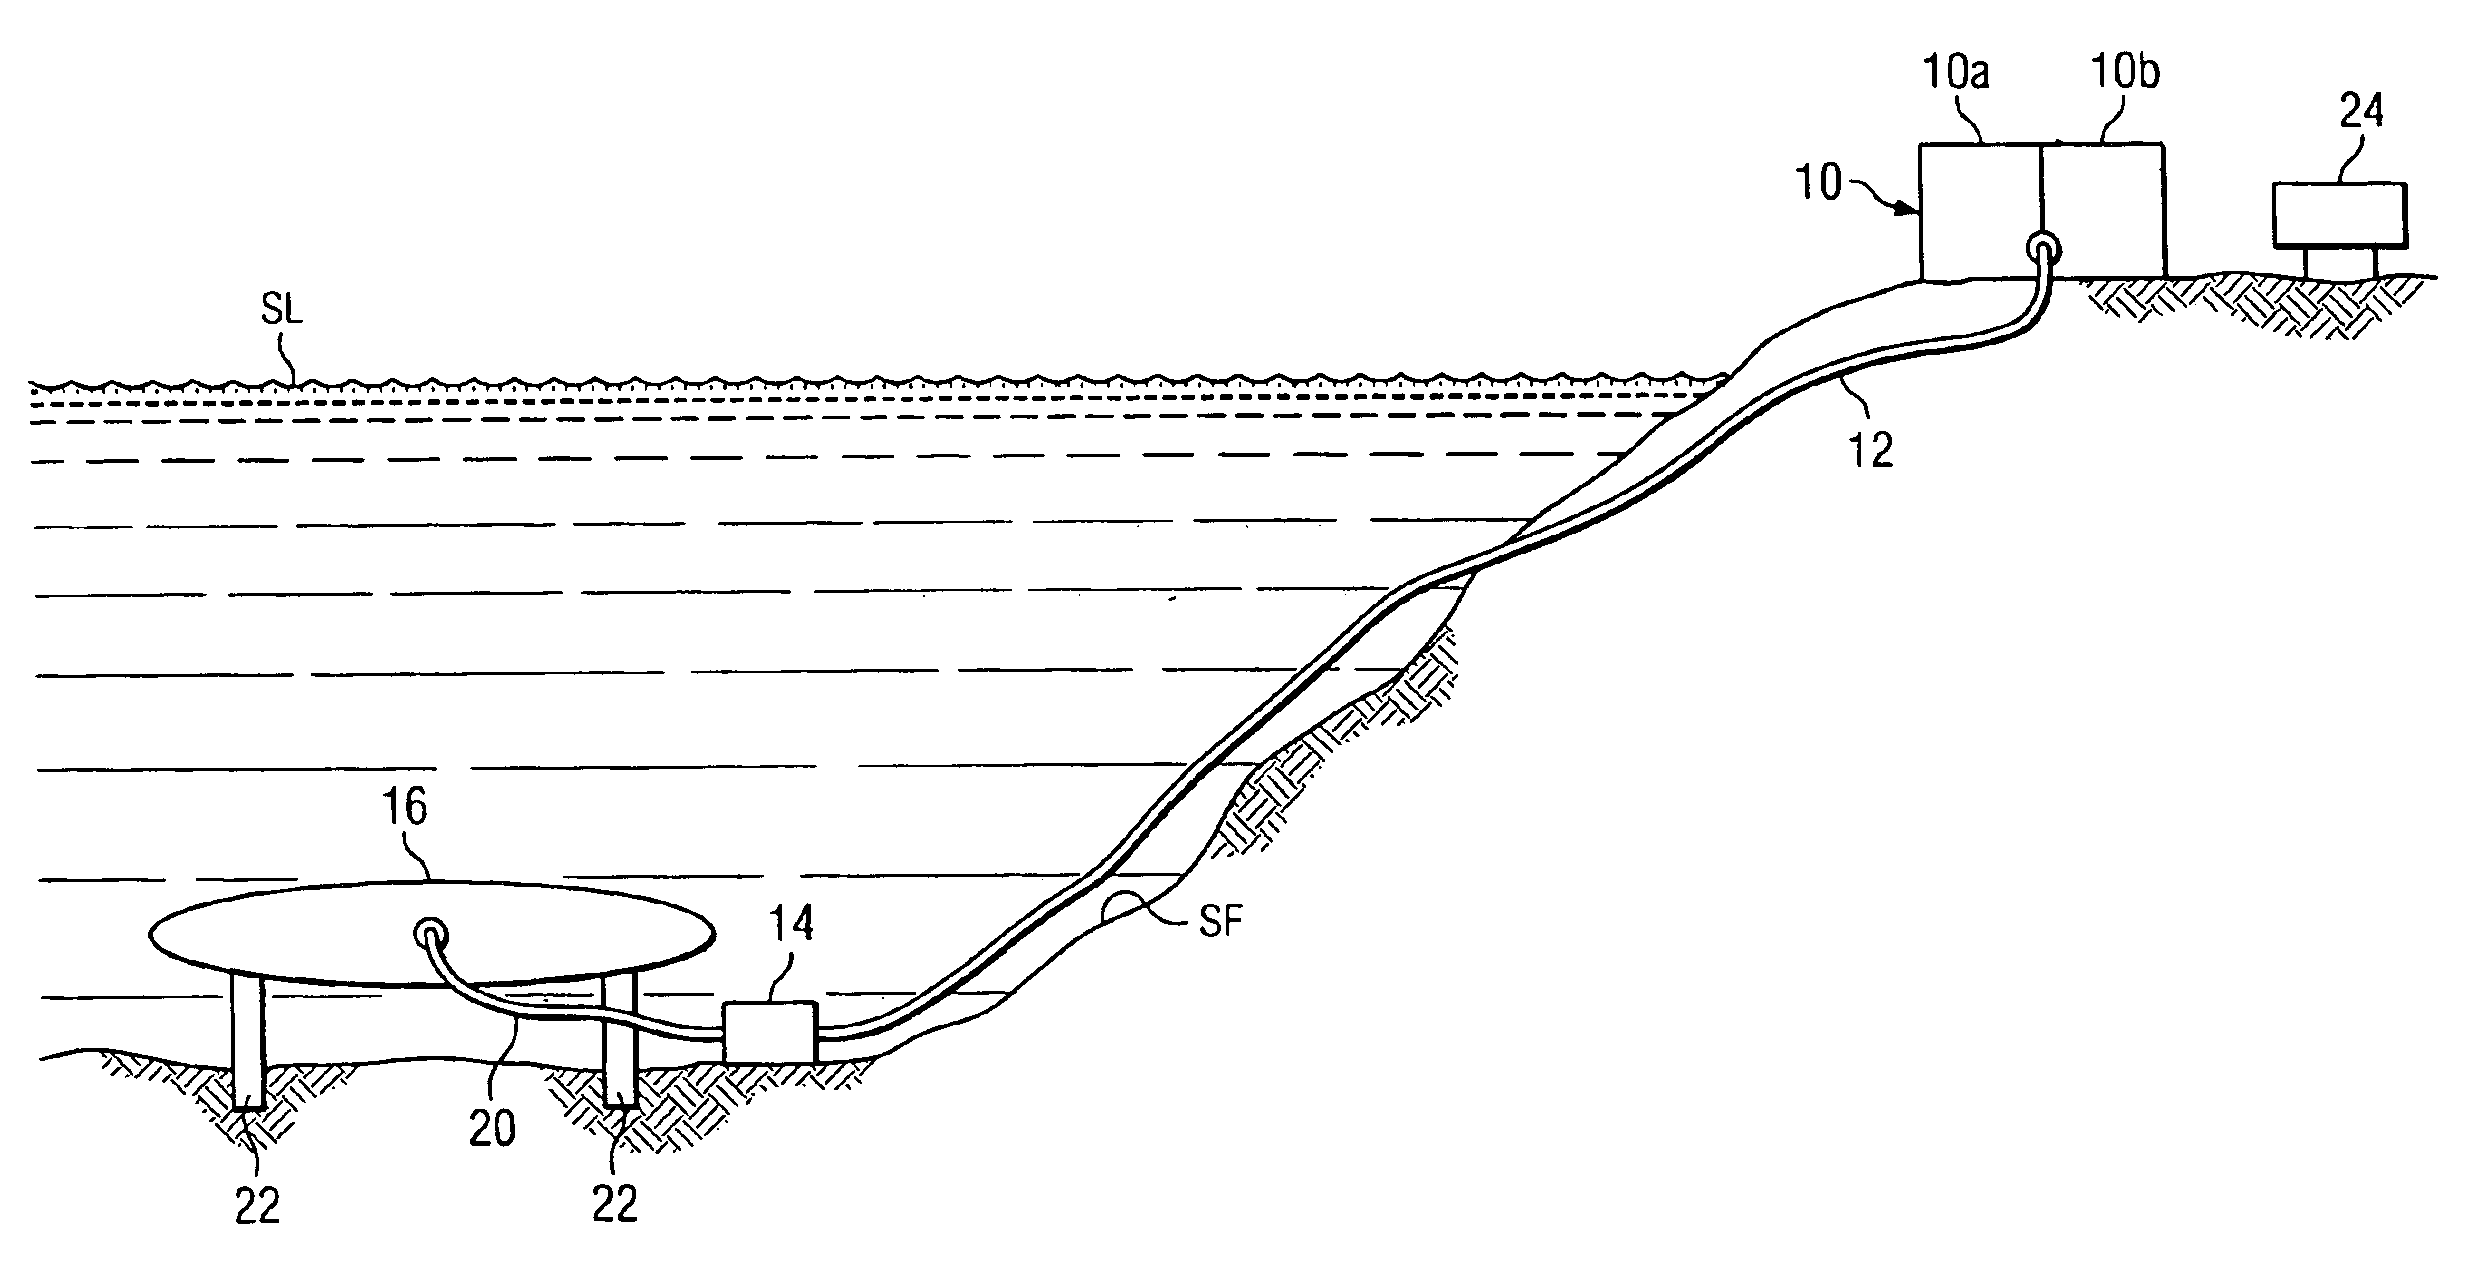 Compressed gas utilization system and method with sub-sea gas storage